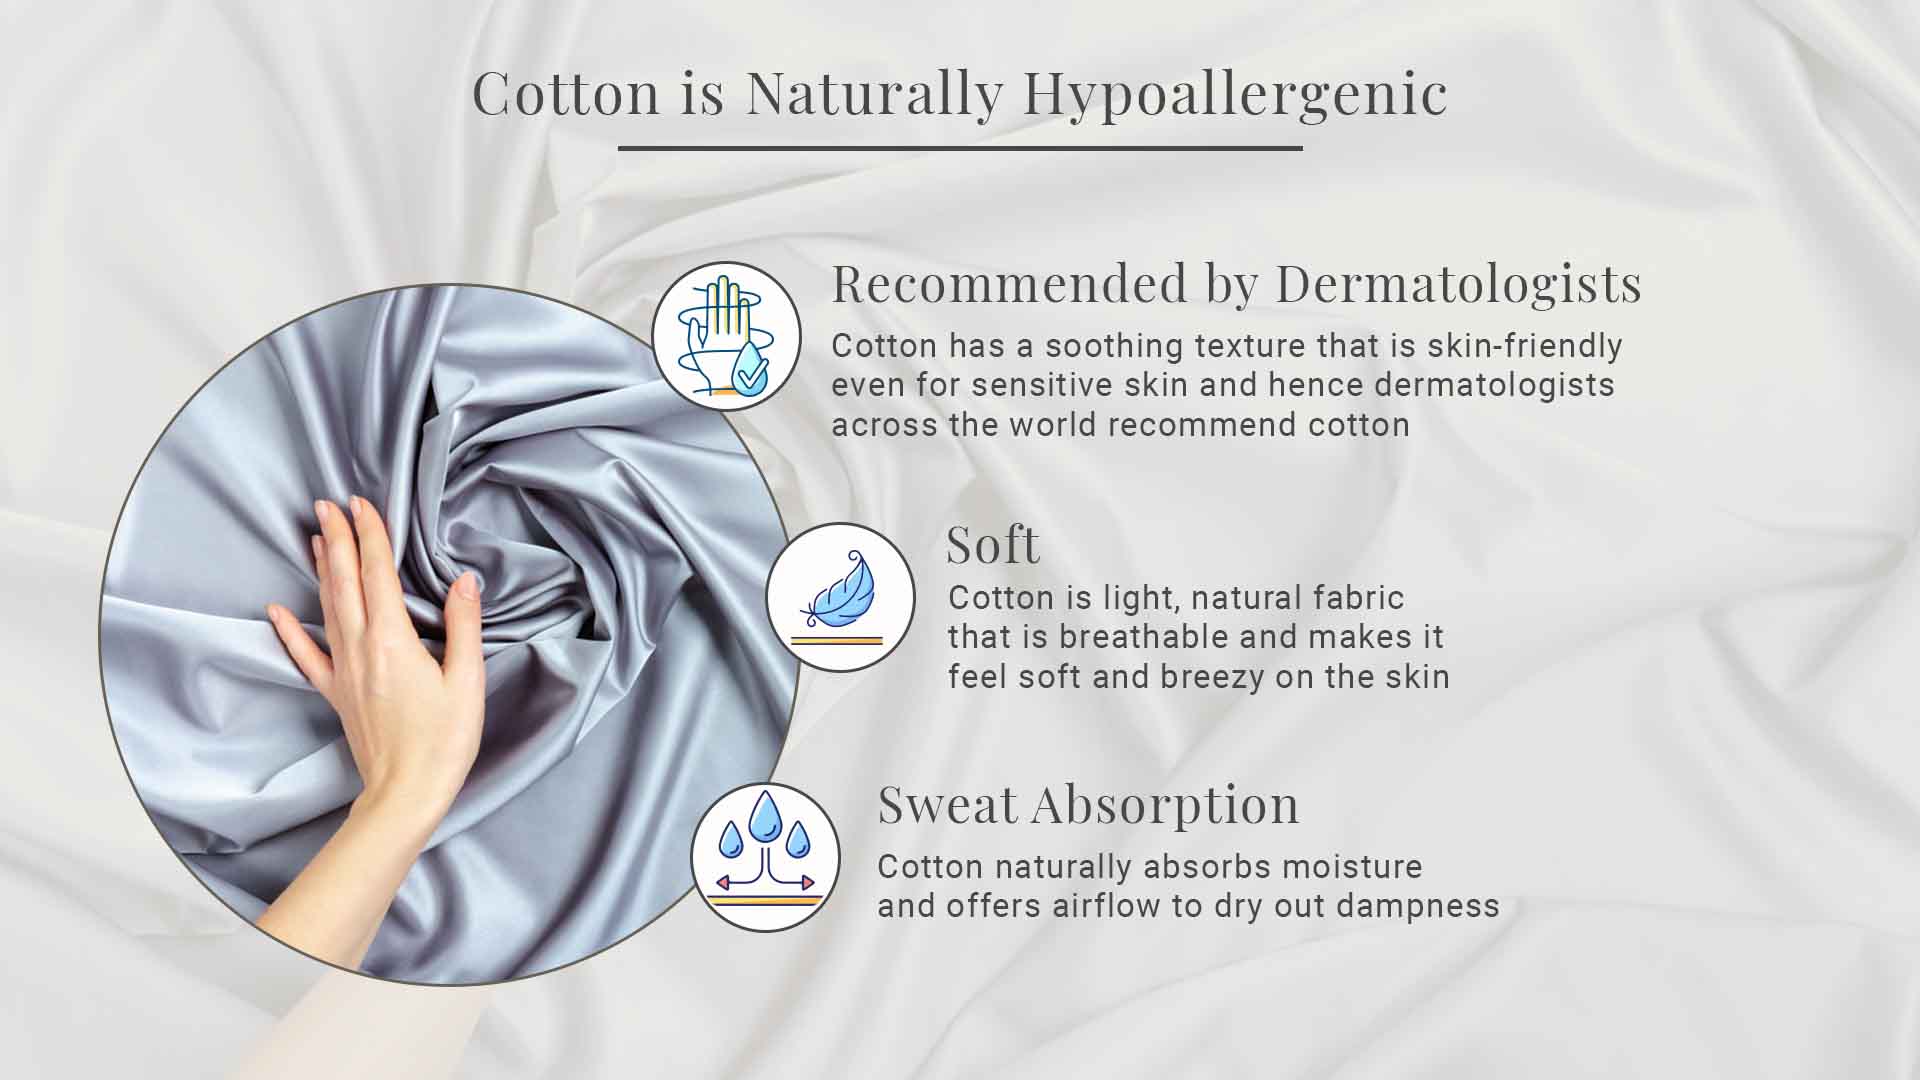 Cotton is Naturally Hypoallergenic